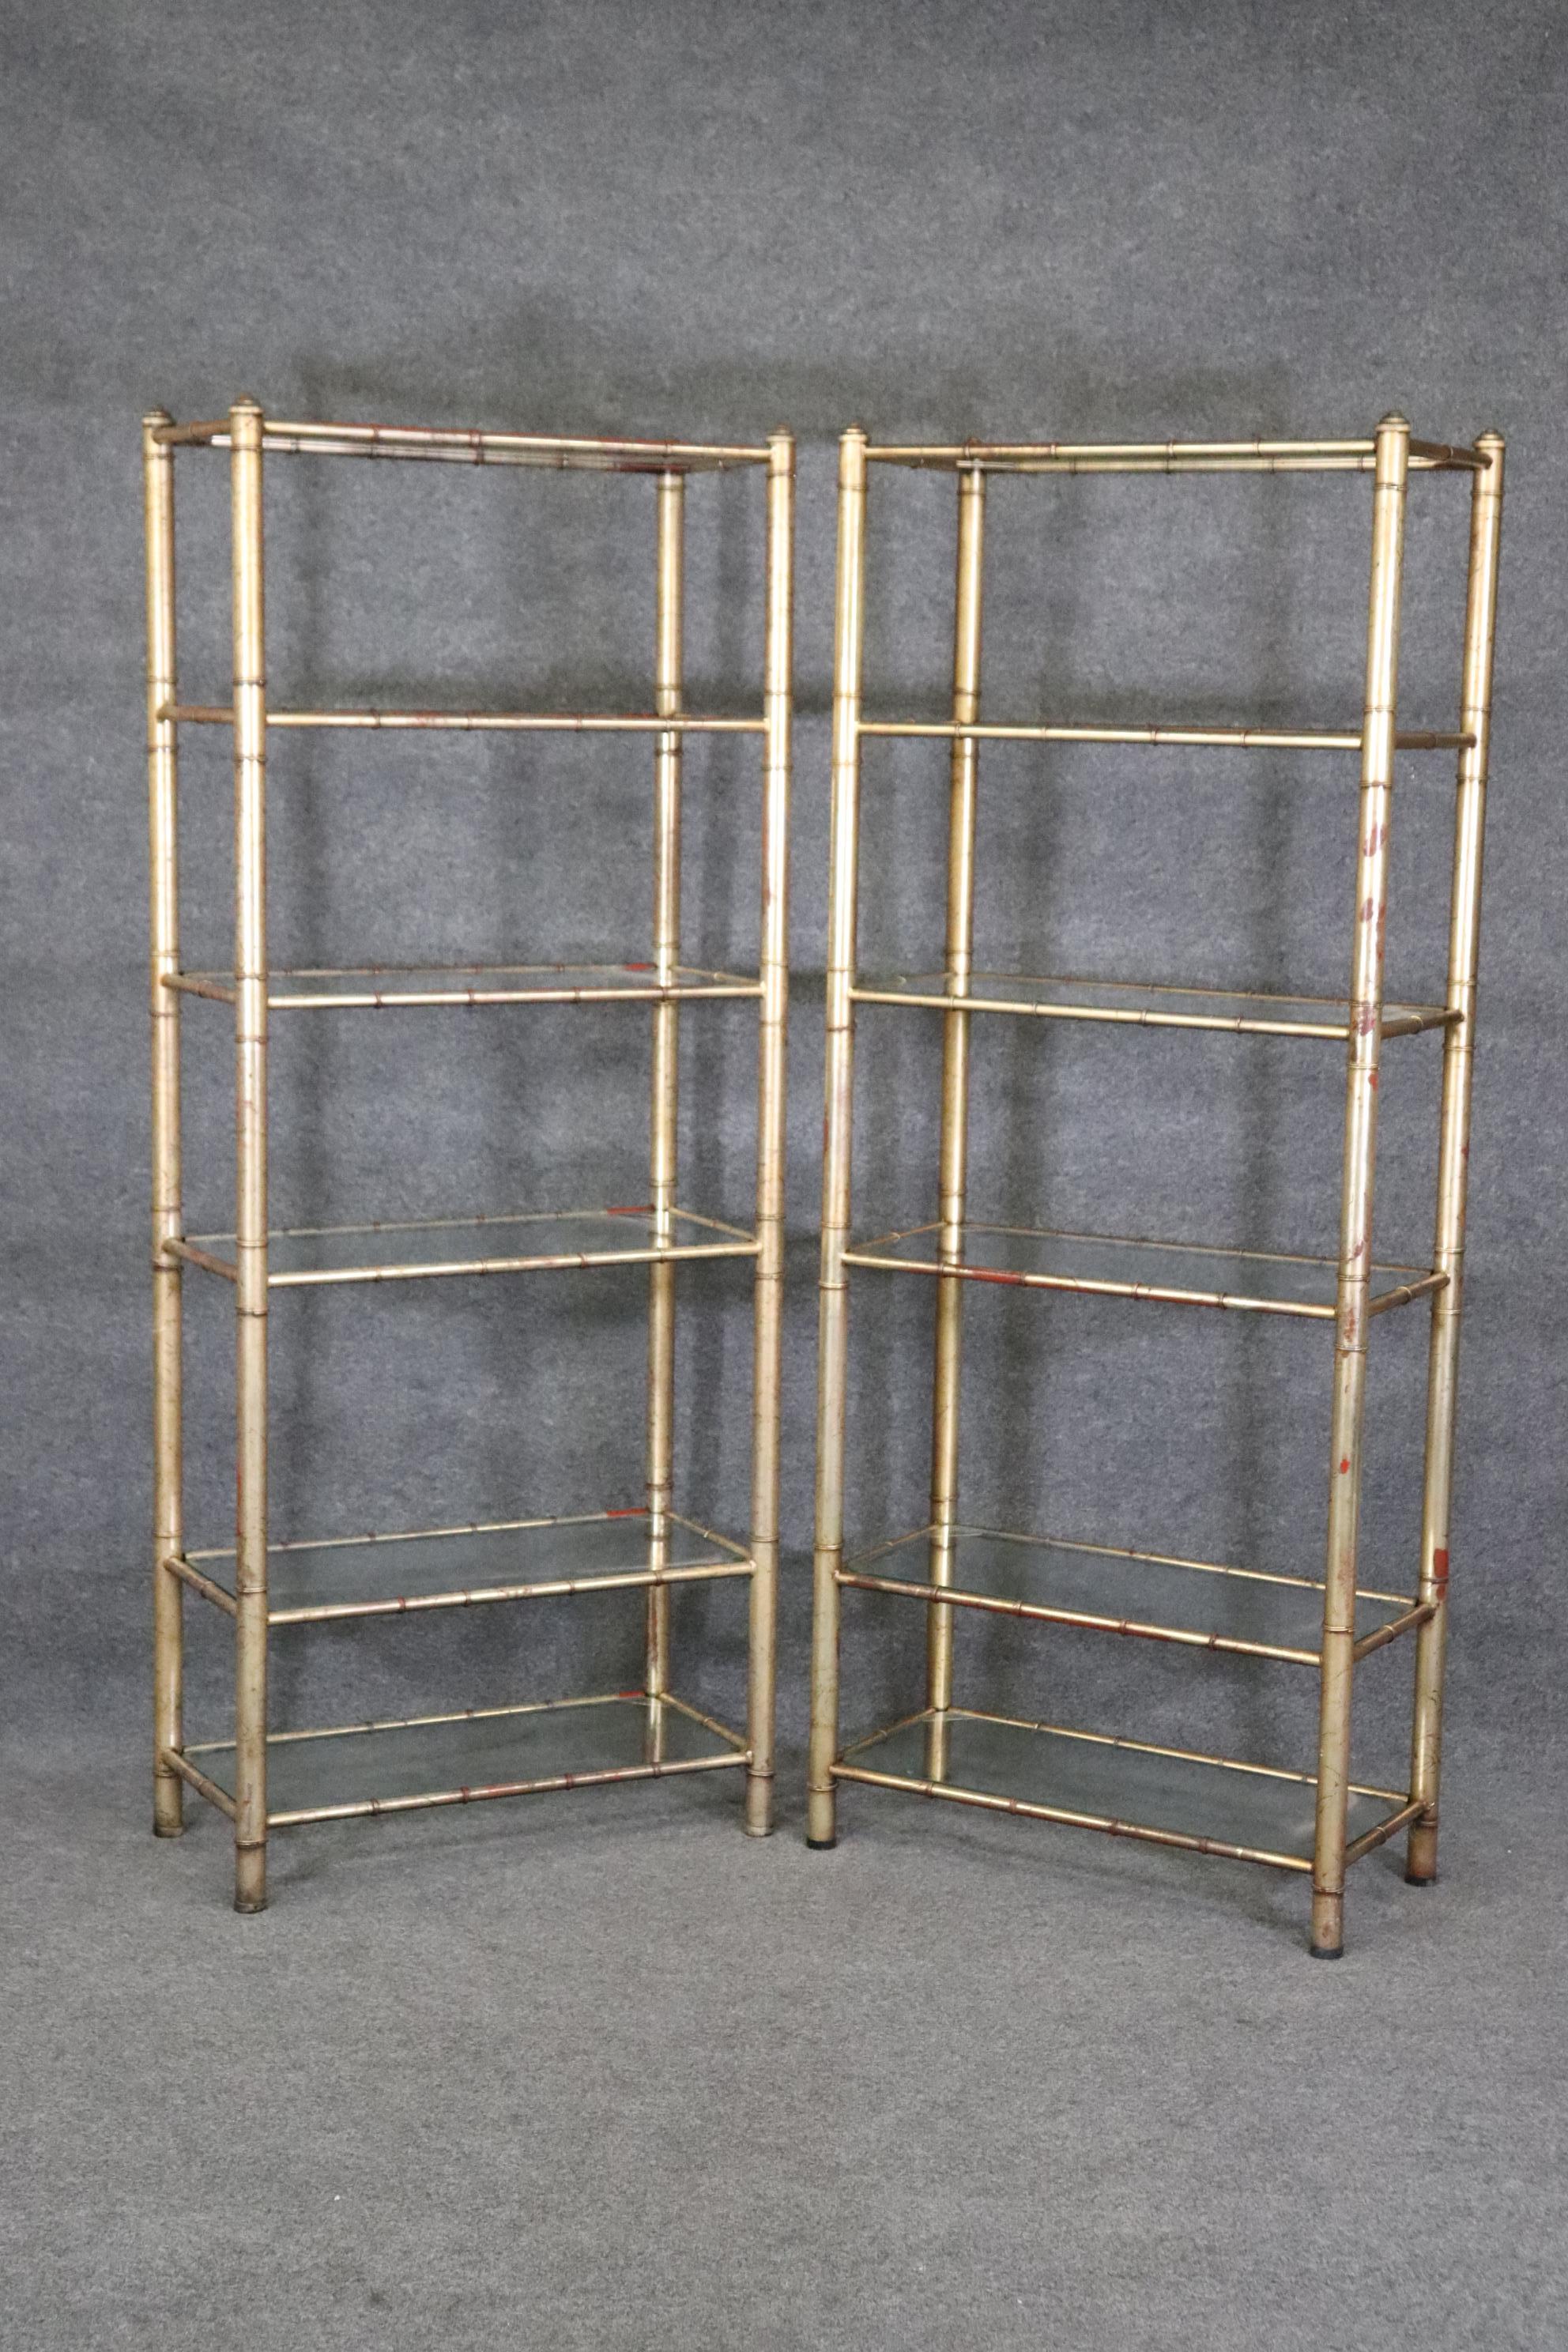 This is a stunning pair of Hollywood Regency style faux bamboo etageres. They have their original crackled gilded finish and glass shelves. The etageres are in good vintage condition and have no major flaws to speak of. The etageres measure 75 tall